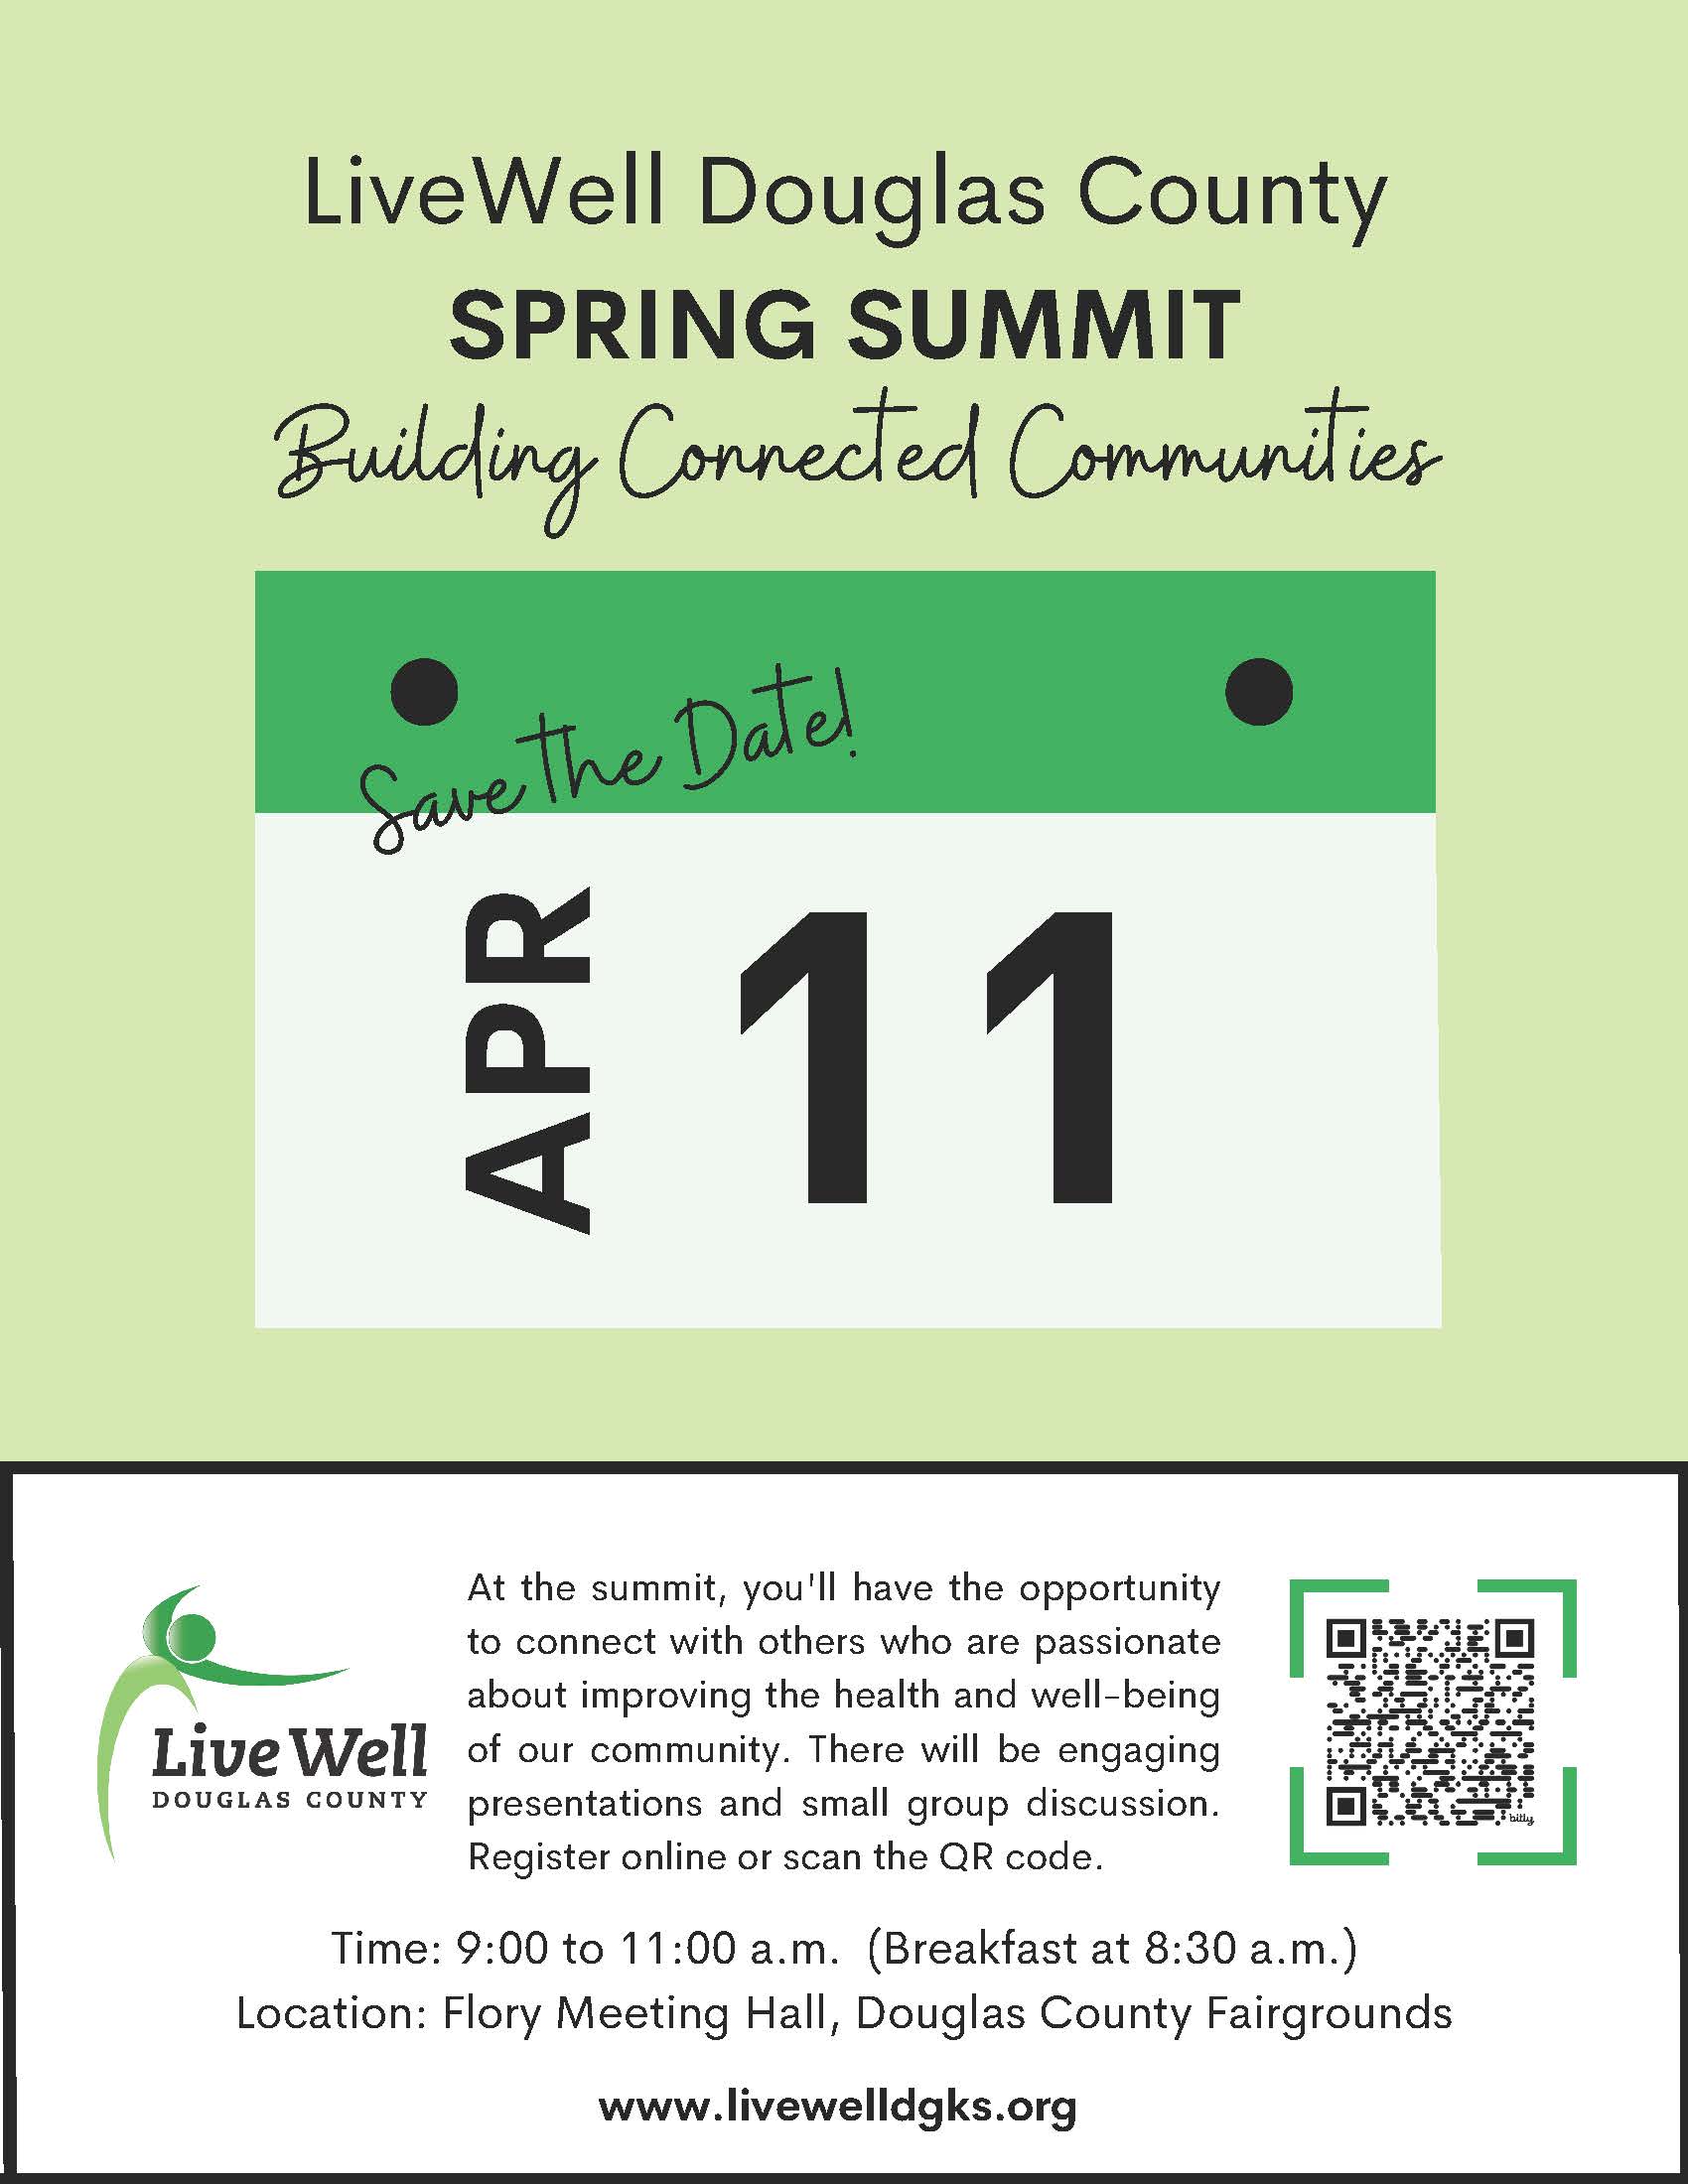 LiveWell Douglas county Spring Summit Promotion